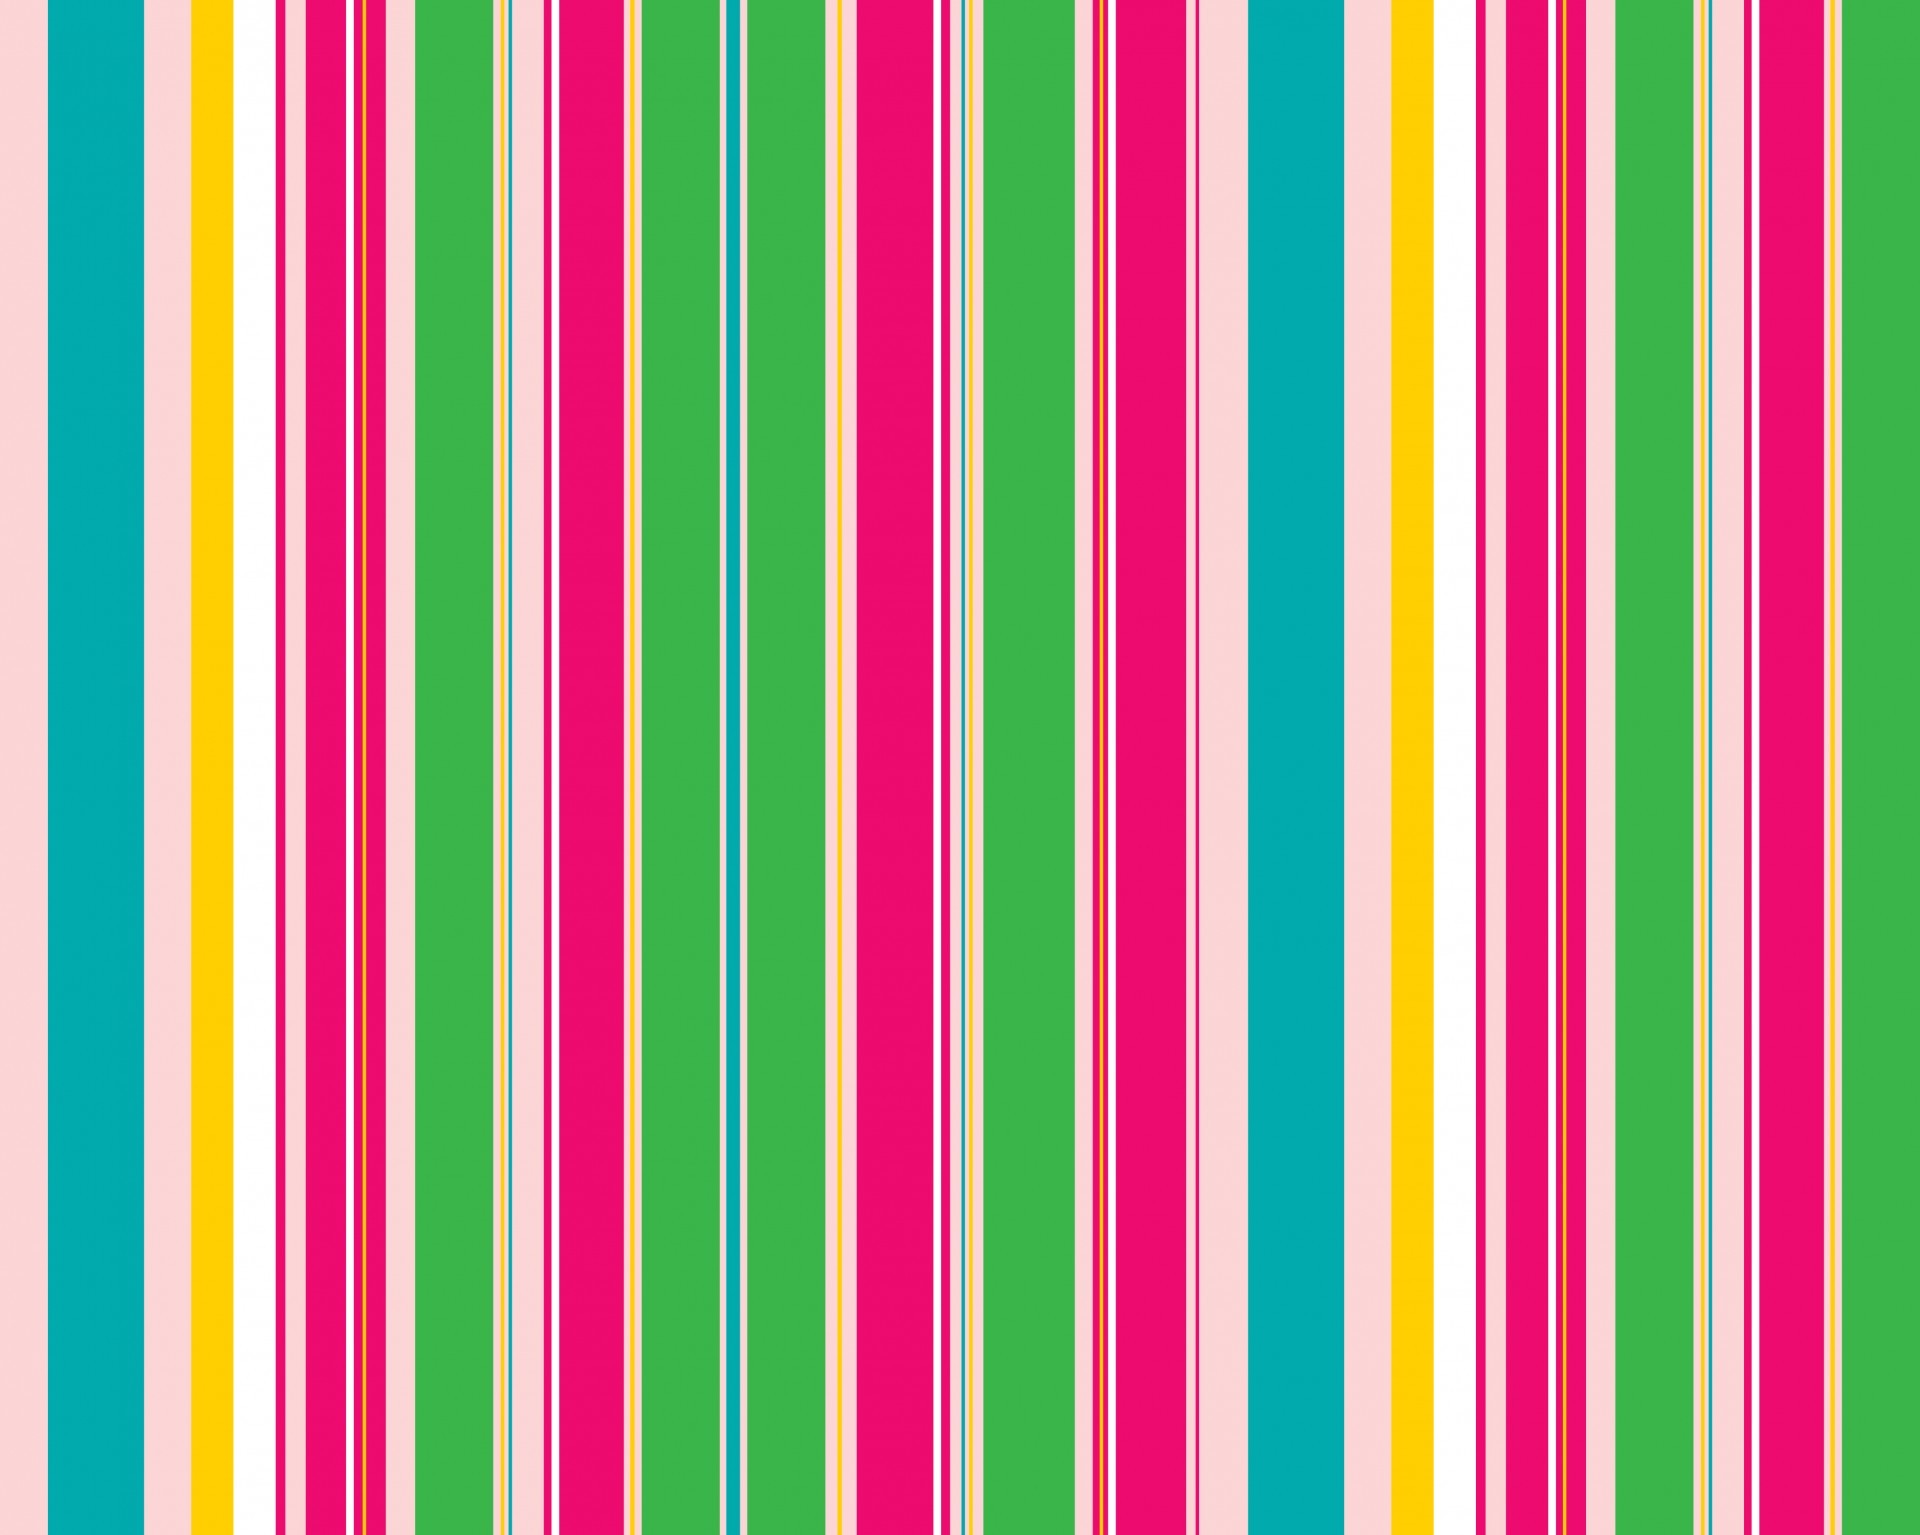 1920x1535 Stripes Colorful Background